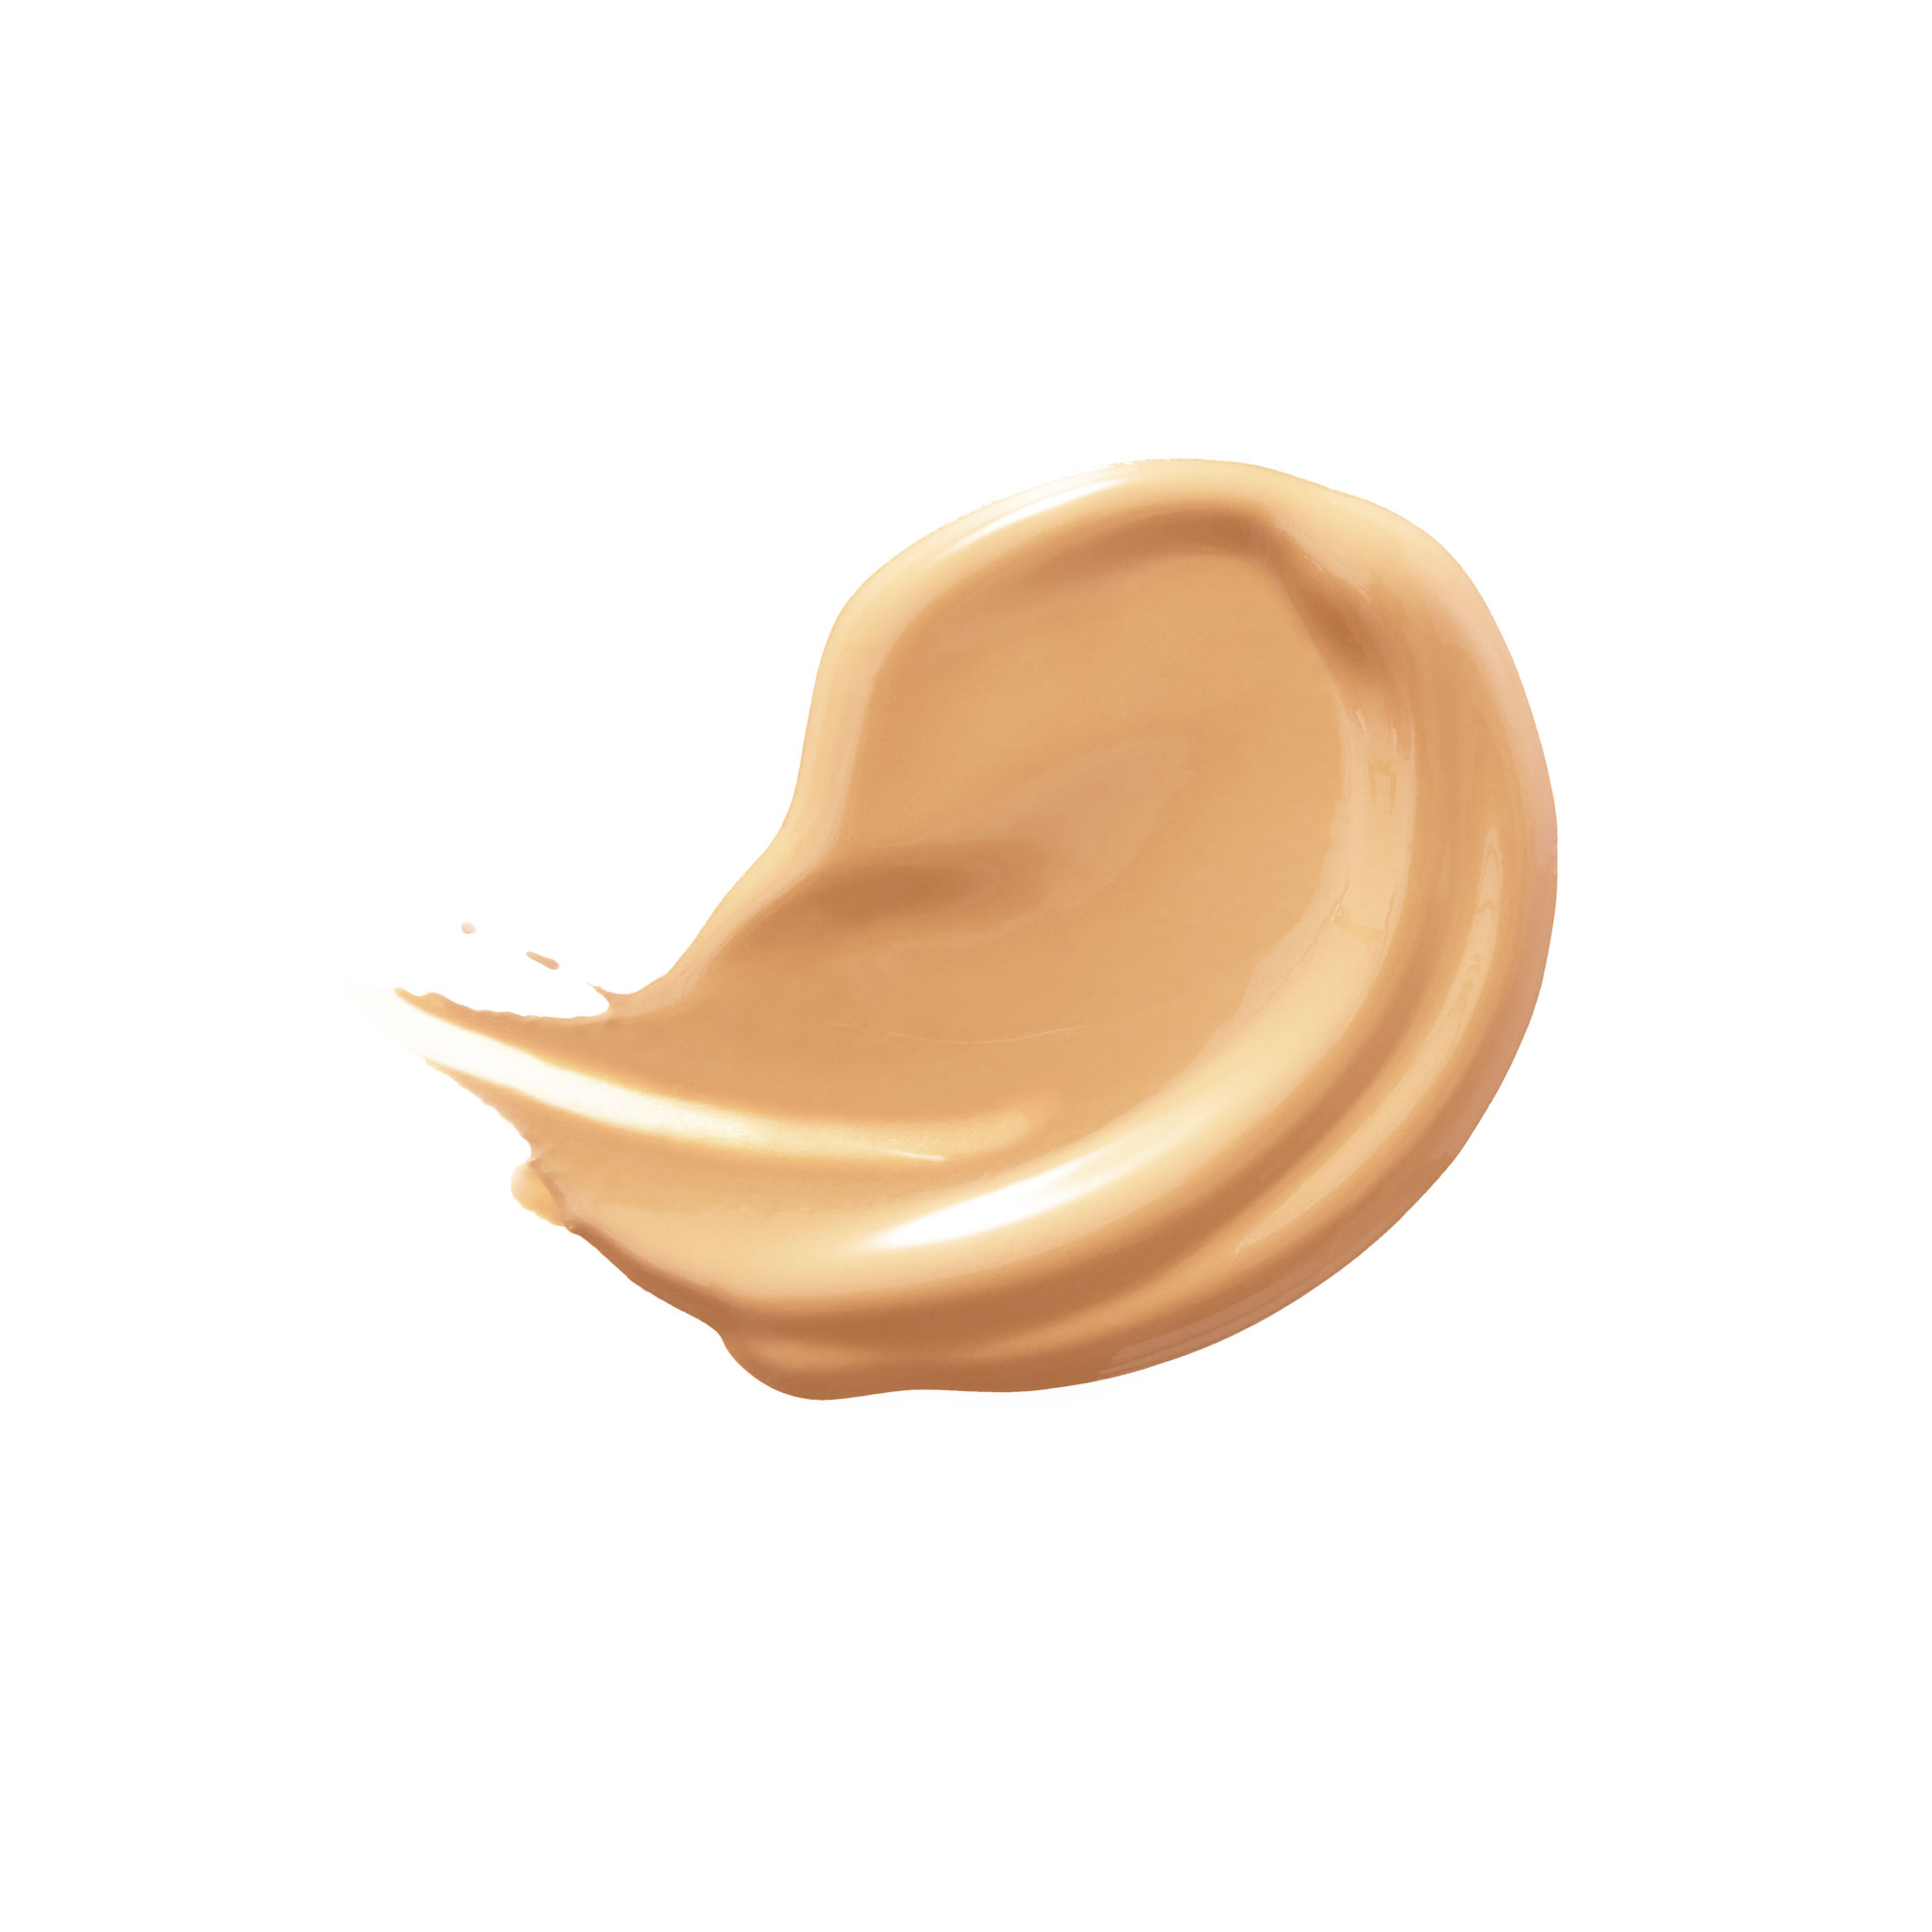 Benefit Cosmetics Boi-ing Cakeless Concealer - Full Stick Waterproof For All Skin Types In Brown, Si